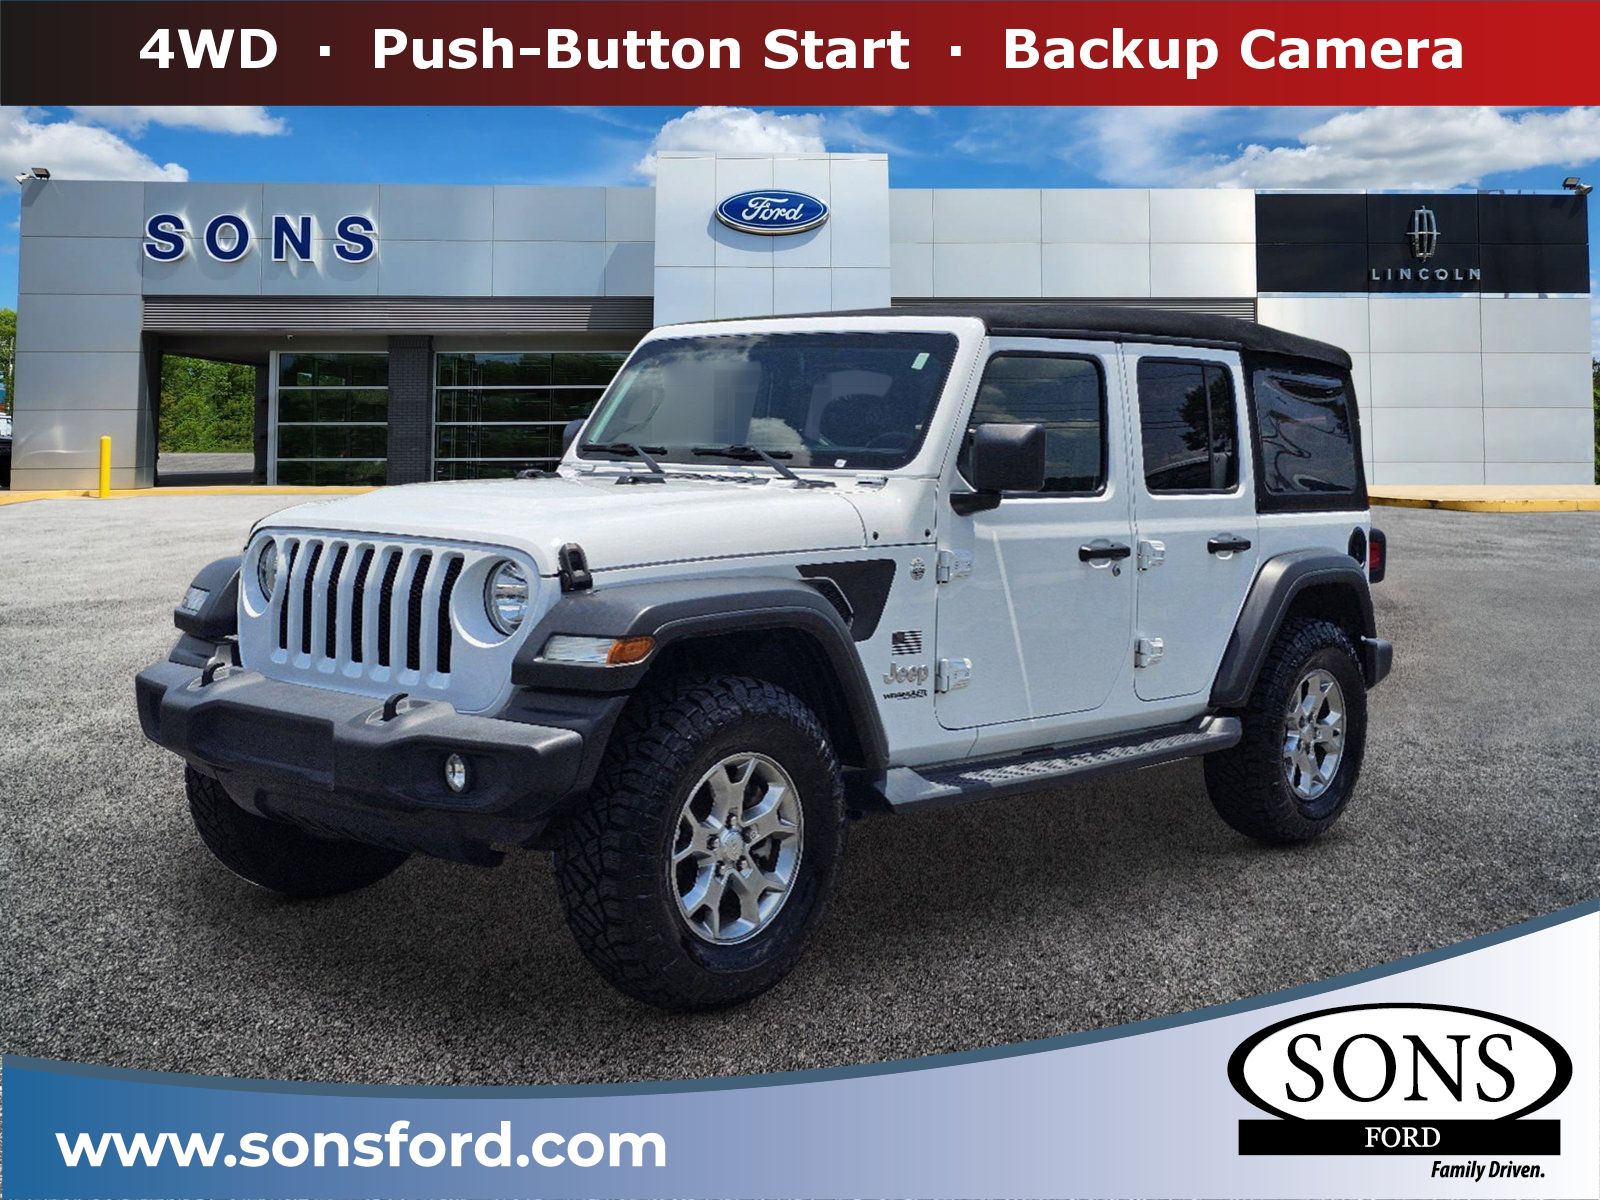 Used, 2020 Jeep Wrangler Unlimited Freedom Edition, White, P1596-1